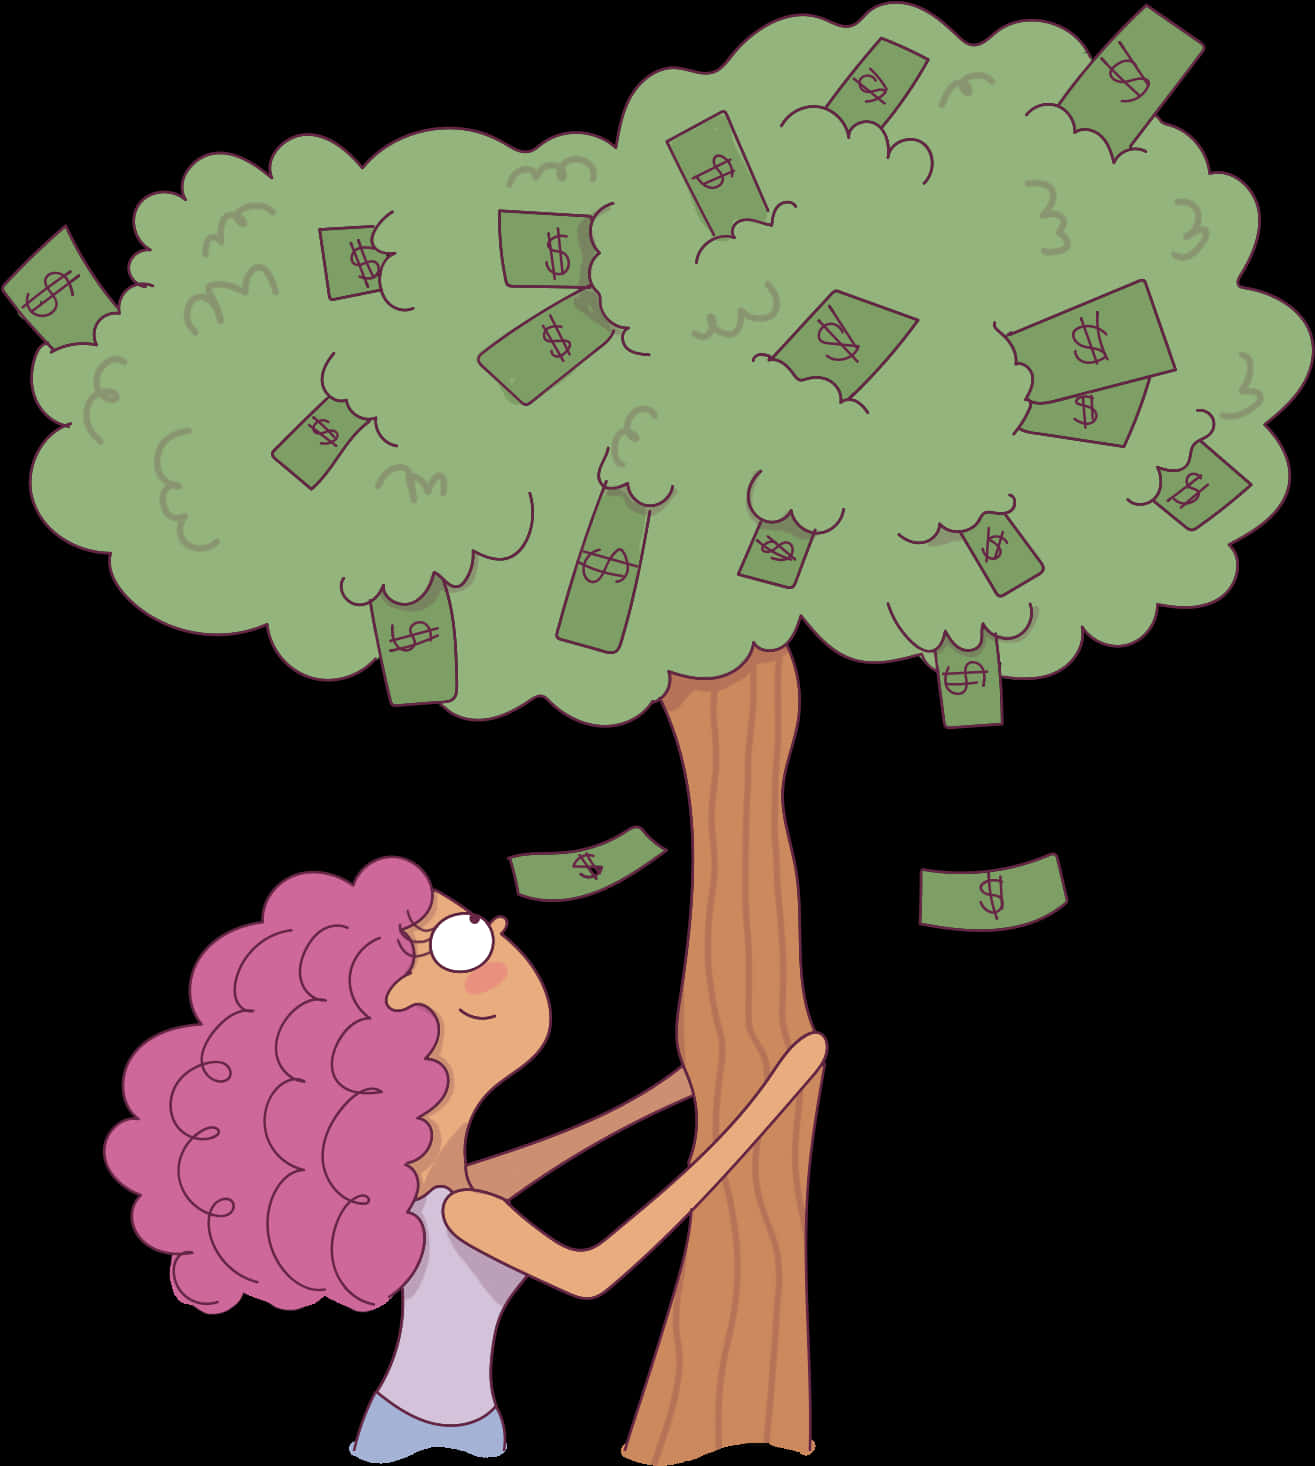 A Cartoon Of A Woman Holding A Tree With Money Falling From It